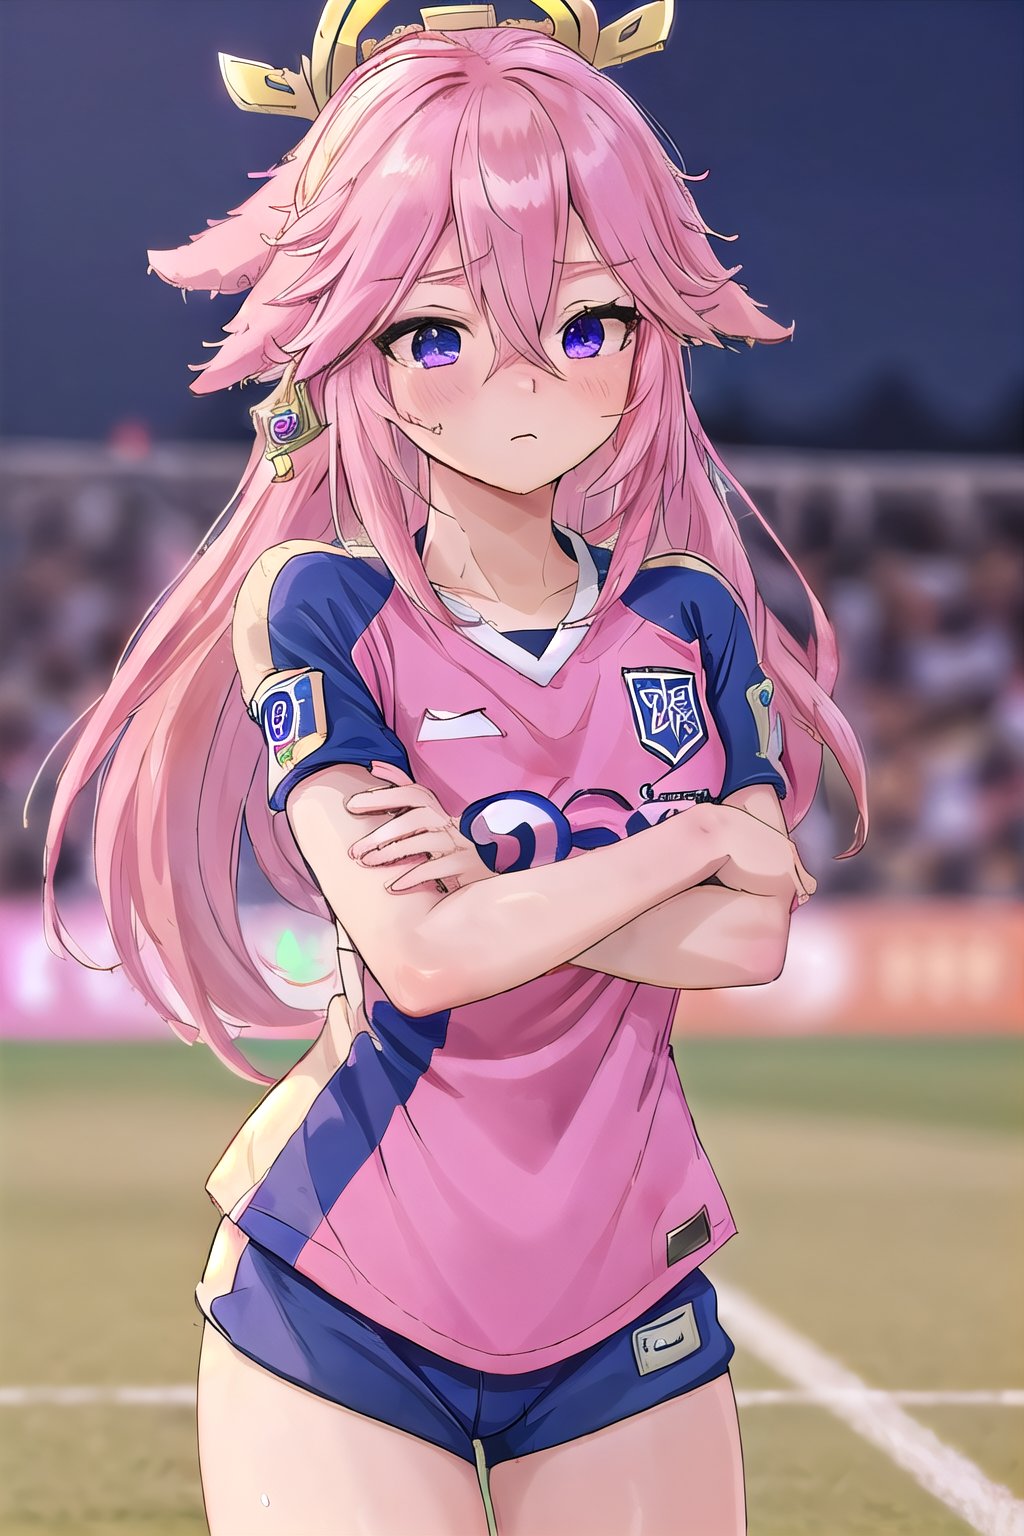 (wearing soccer_uniform:1.3),pink uniform, good hand,4k, high-res, masterpiece, best quality, head:1.3,((Hasselblad photography)), finely detailed skin, sharp focus, (cinematic lighting), collarbone, night, soft lighting, dynamic angle, [:(detailed face:1.2):0.2],(((inside_soccer_field))), solo,yaemikodef